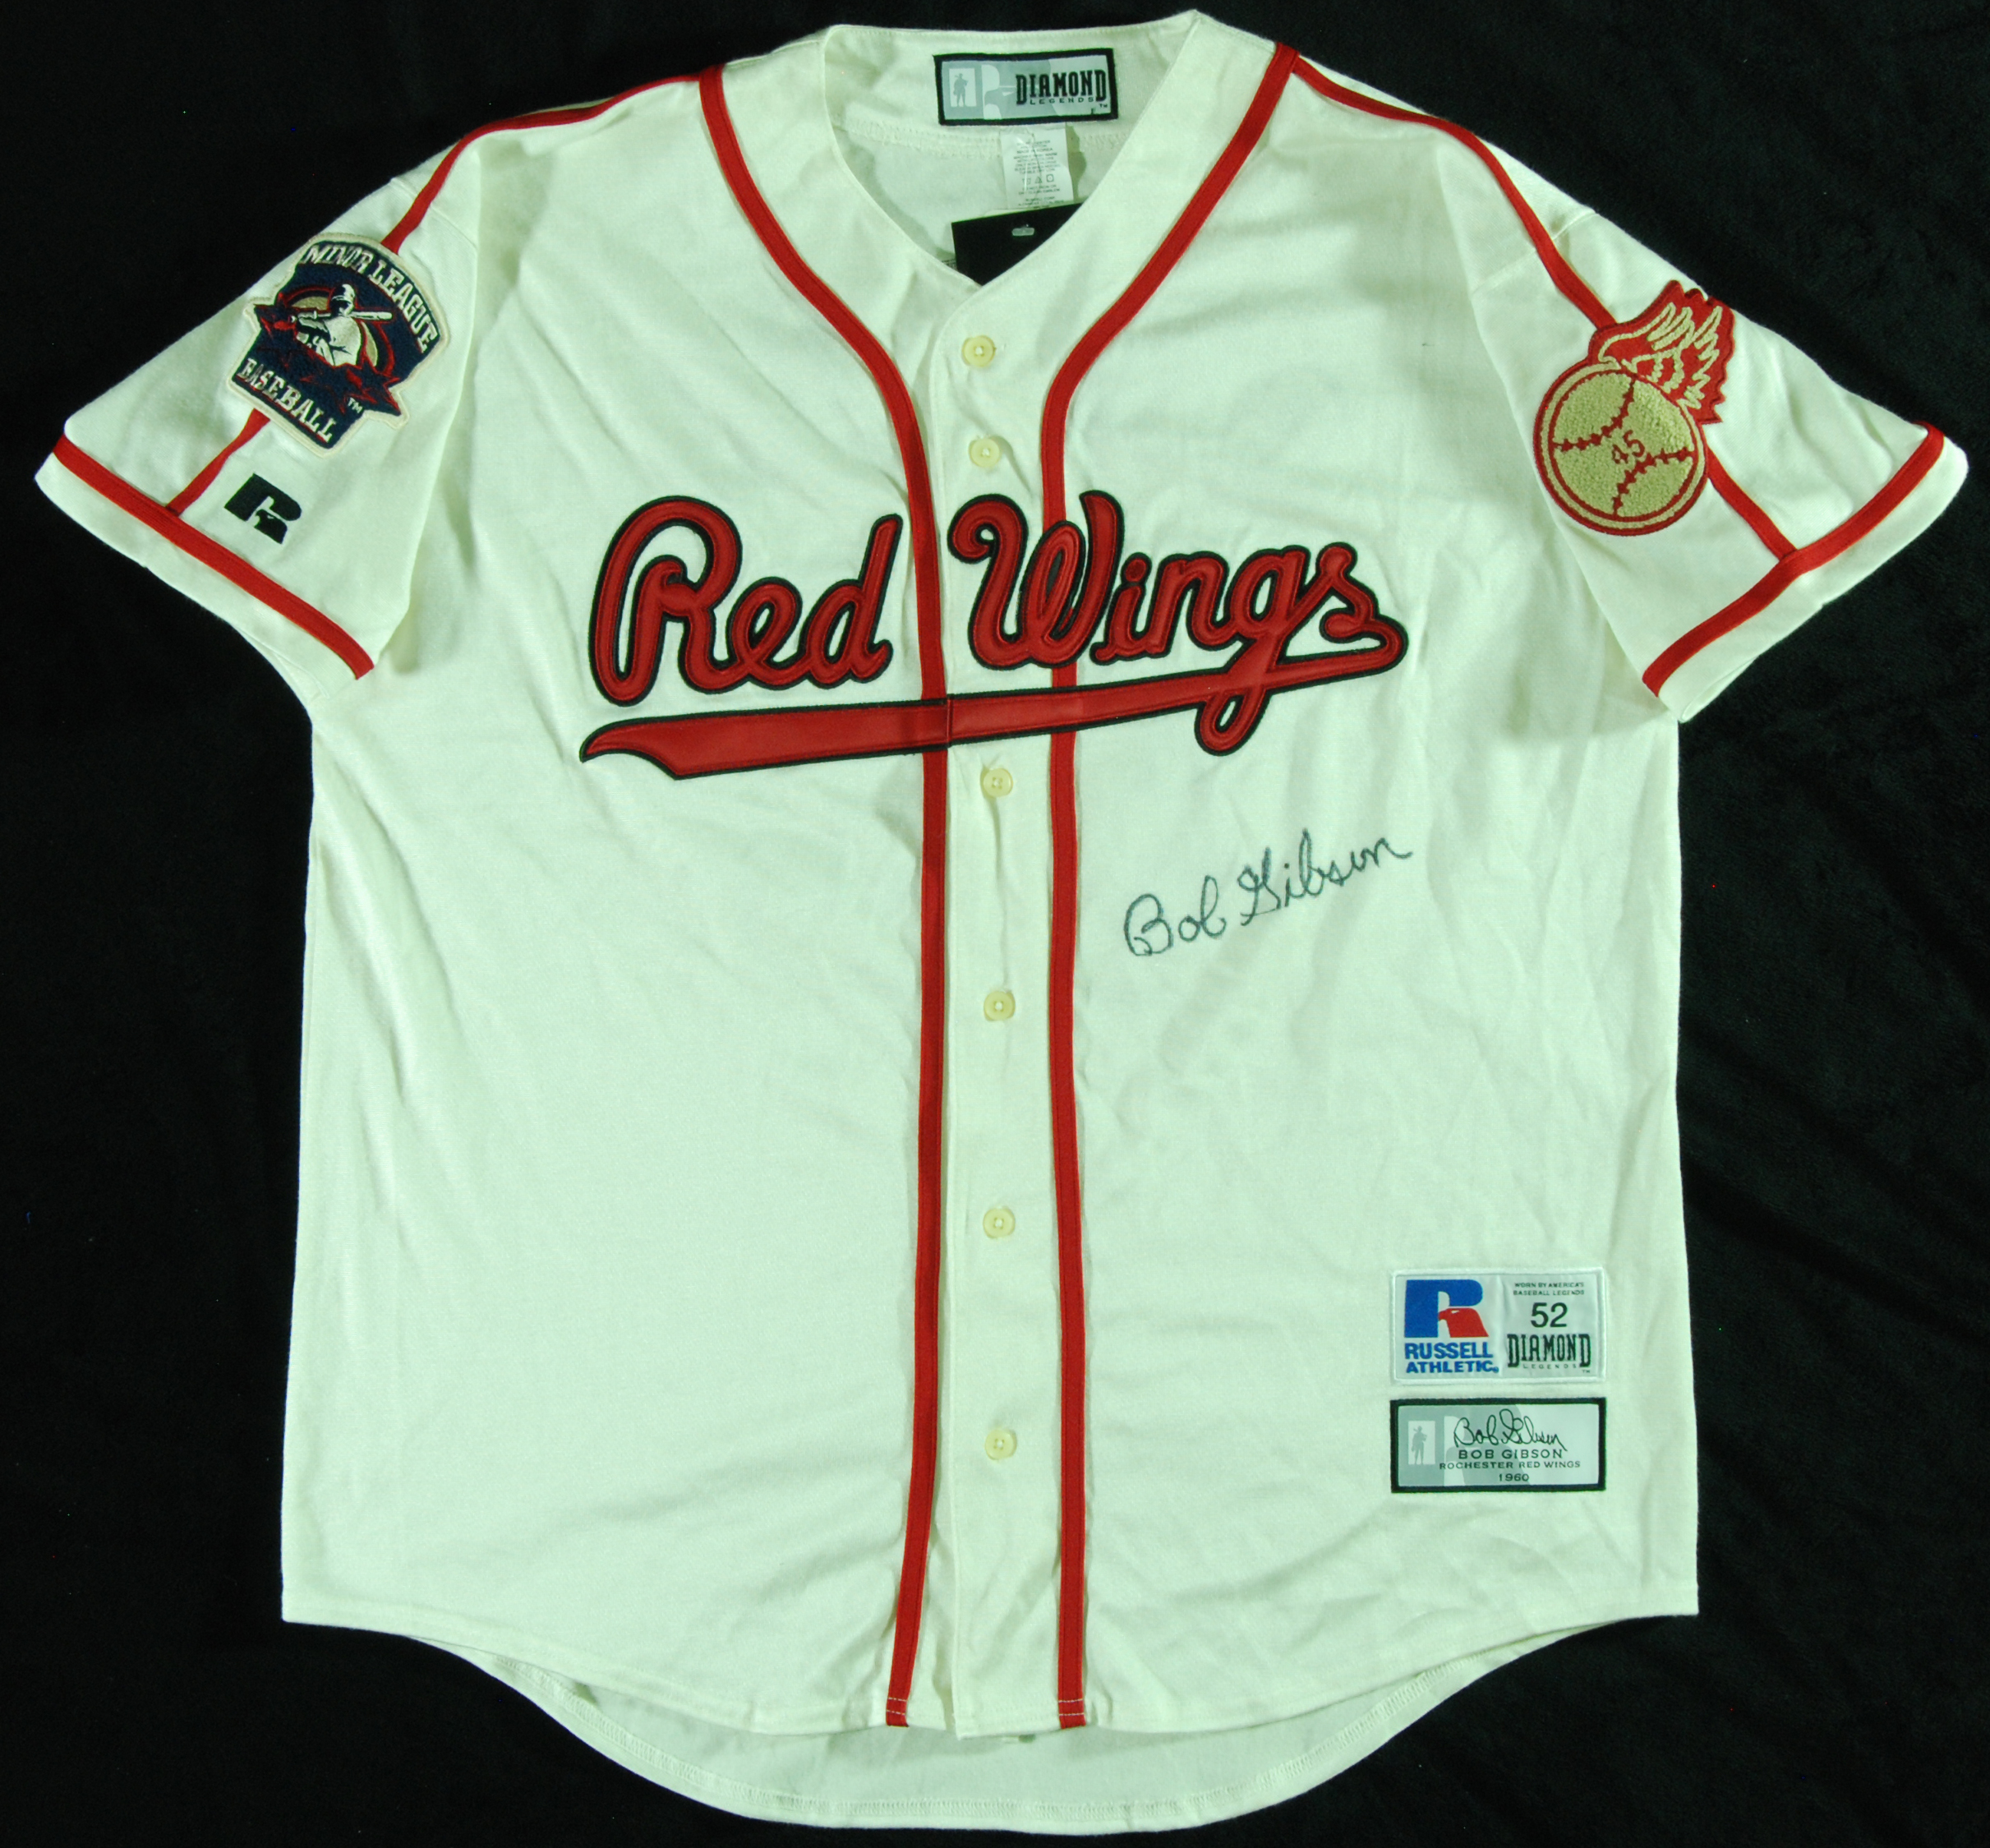 Bob Gibson 1960 Rochester Red Wings Throwback Minor League Baseball Jersey